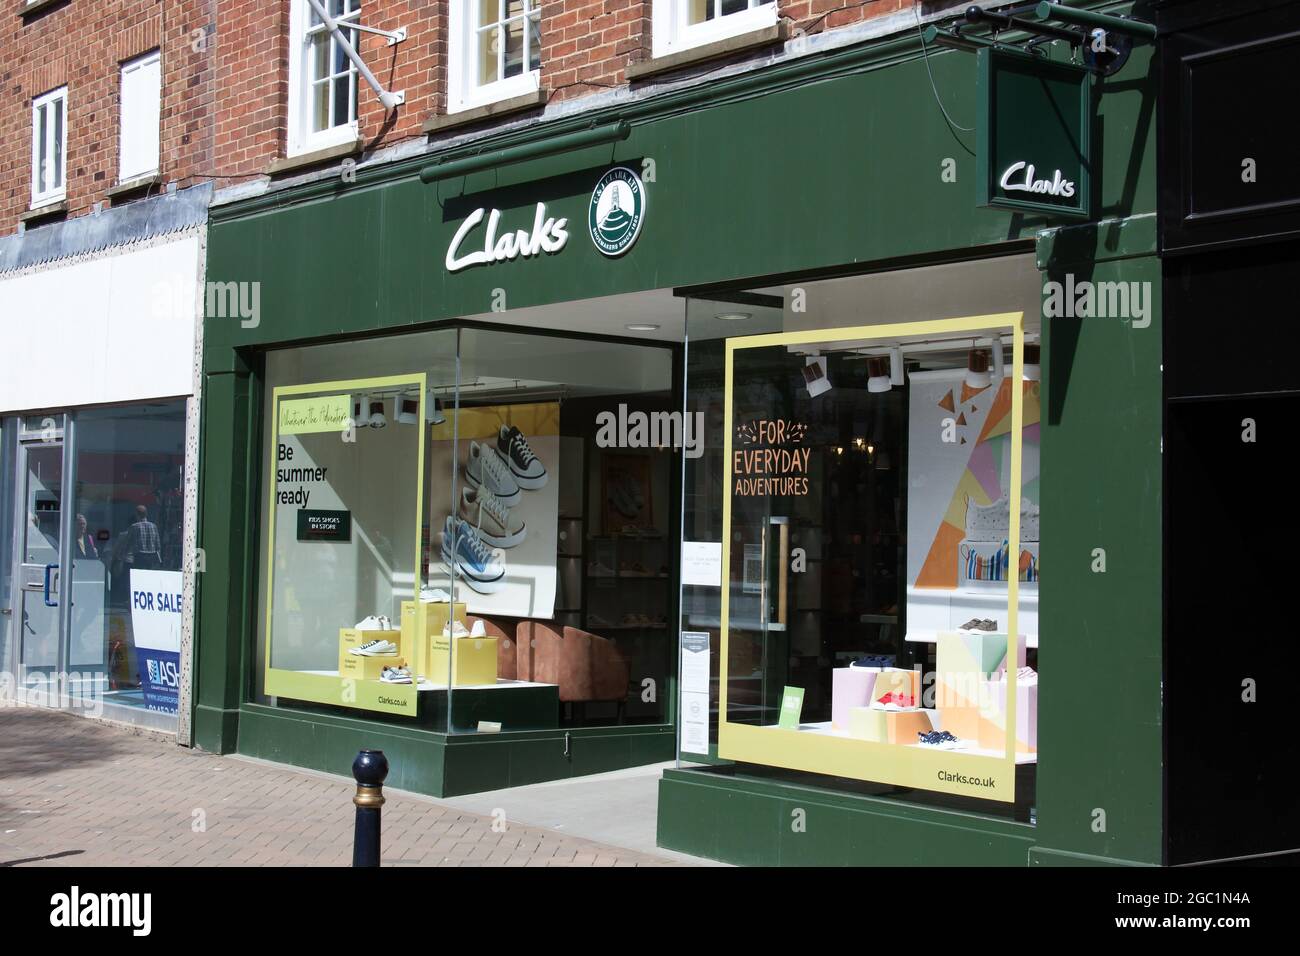 The Clarks shoe shop in Gloucester in the UK Stock Photo - Alamy